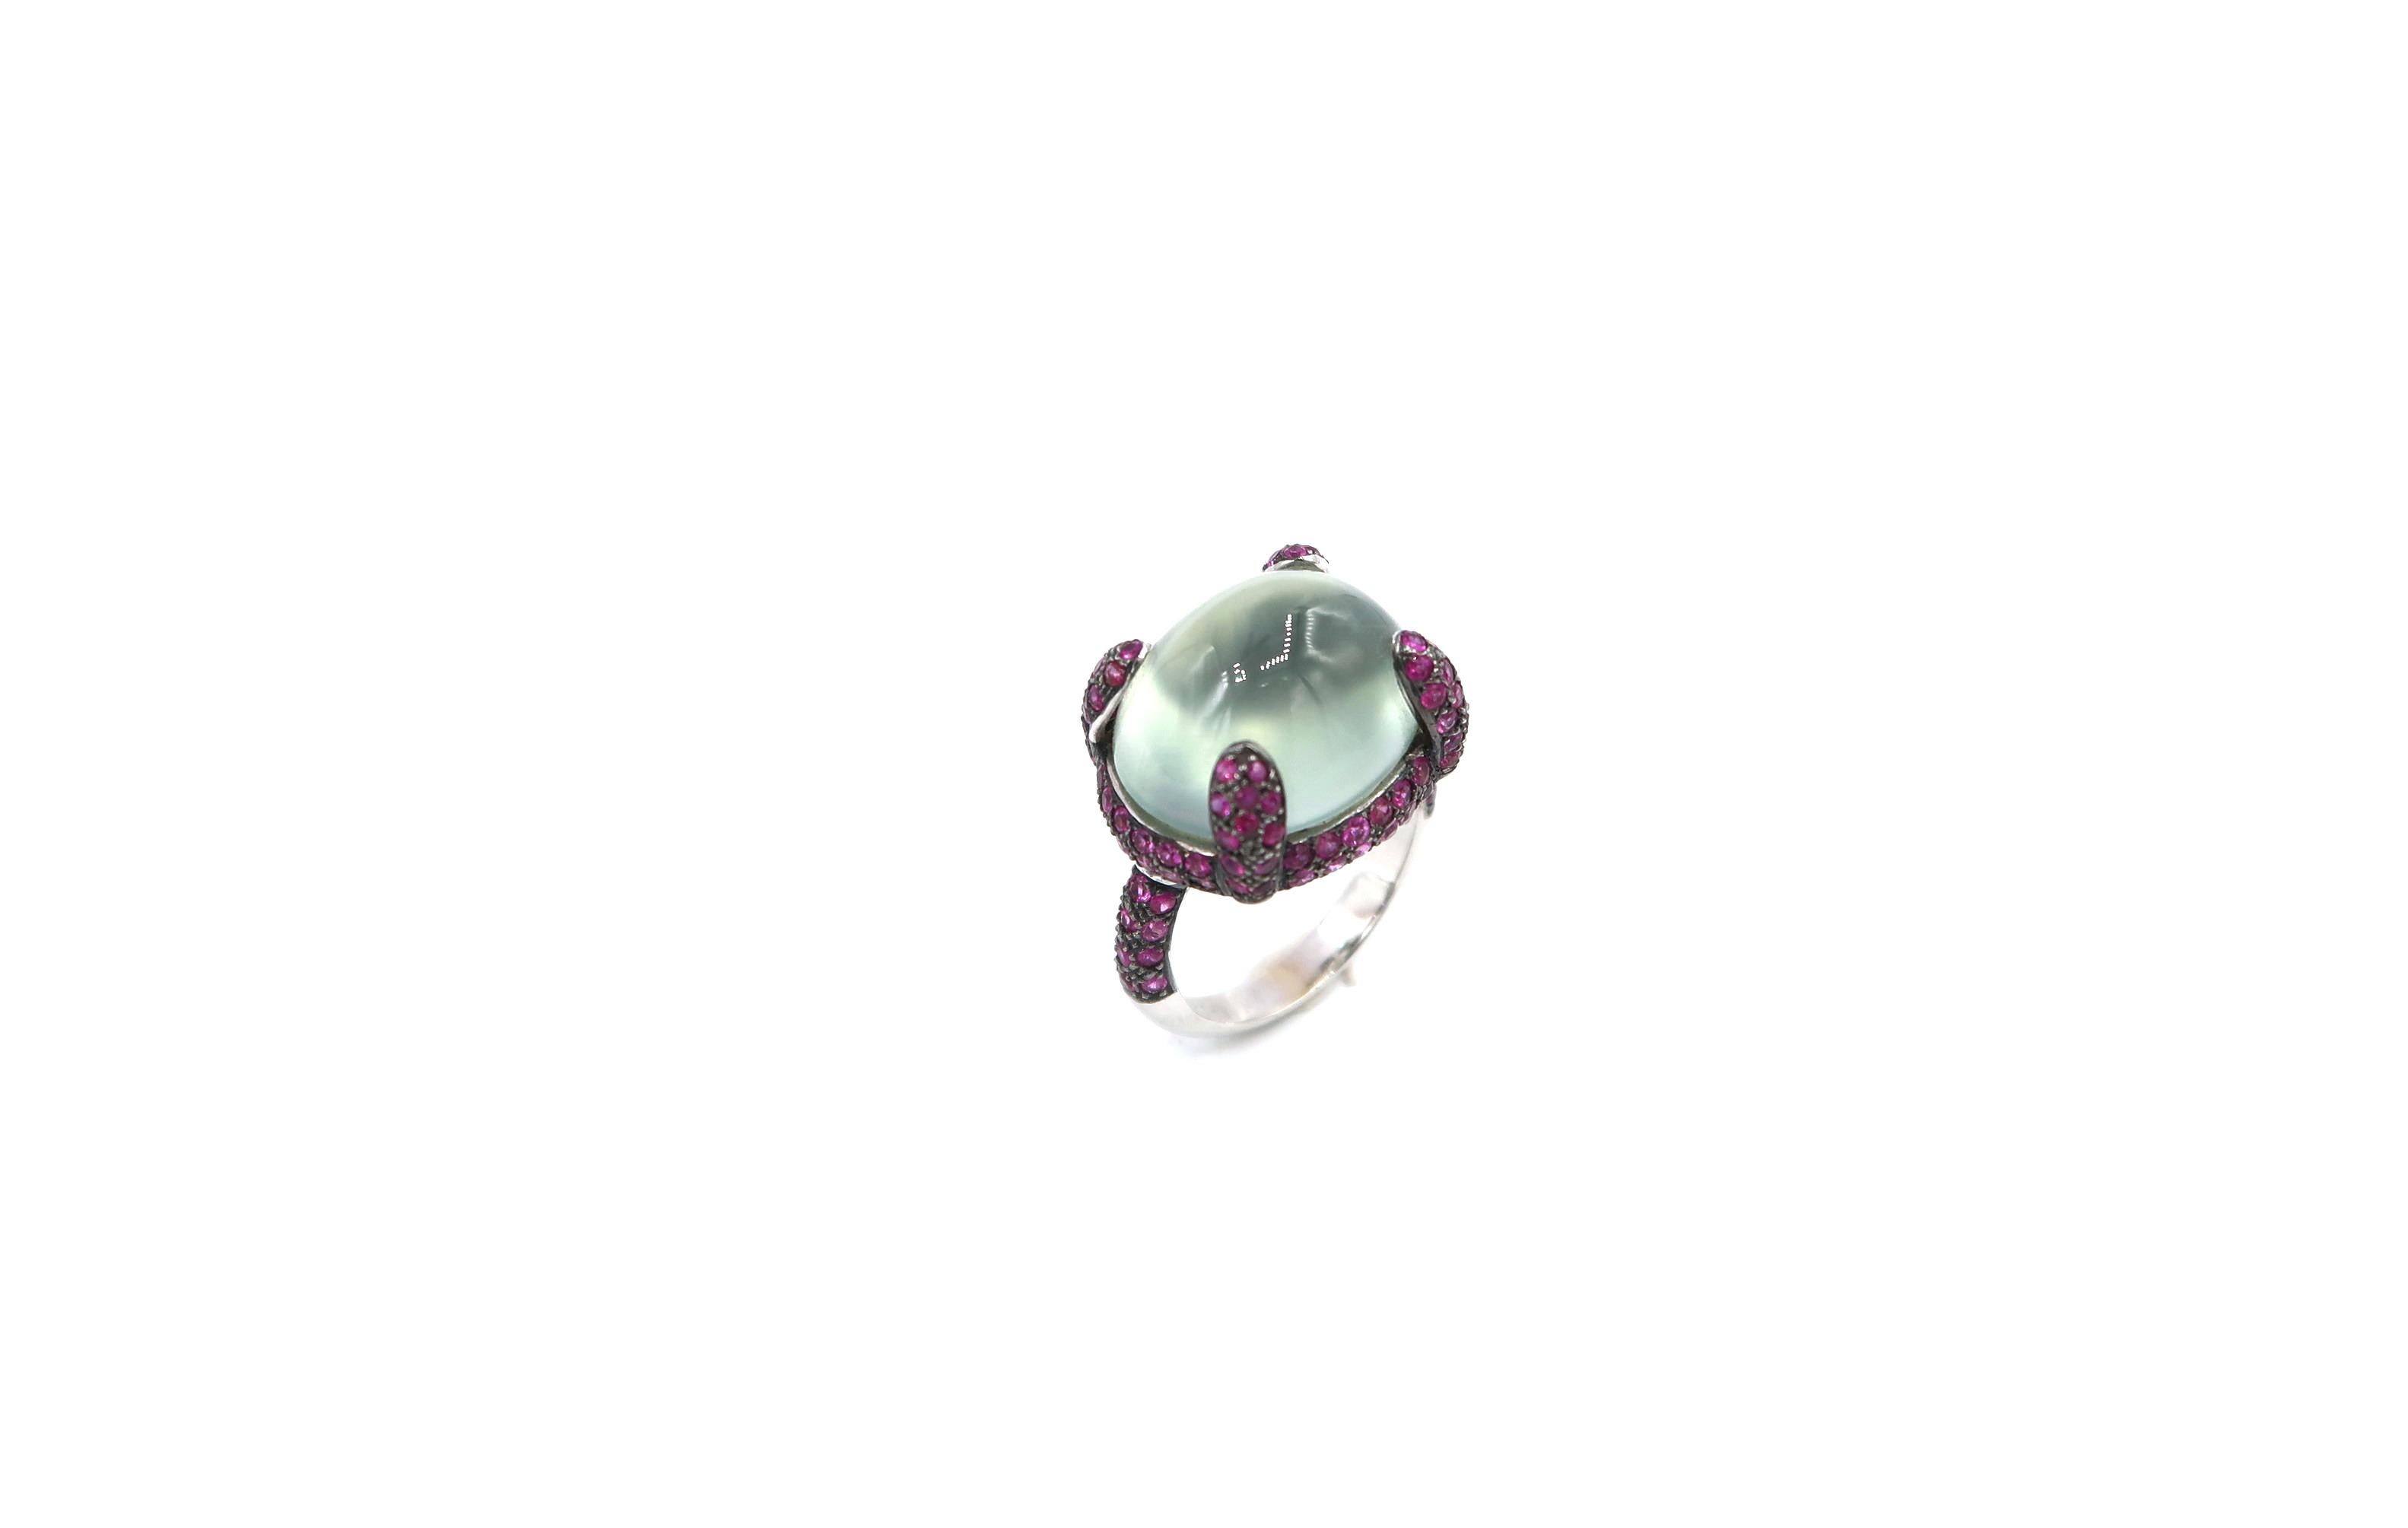 Cabochon Green Amethyst Ring in 18K White Gold with Pavé Pink Sapphire
Green Amethyst : 20.02cts.
Pink Sapphire : 1.68ct.
Gold : 18K White Gold 9.063g.
Ring Size : 50 1/2